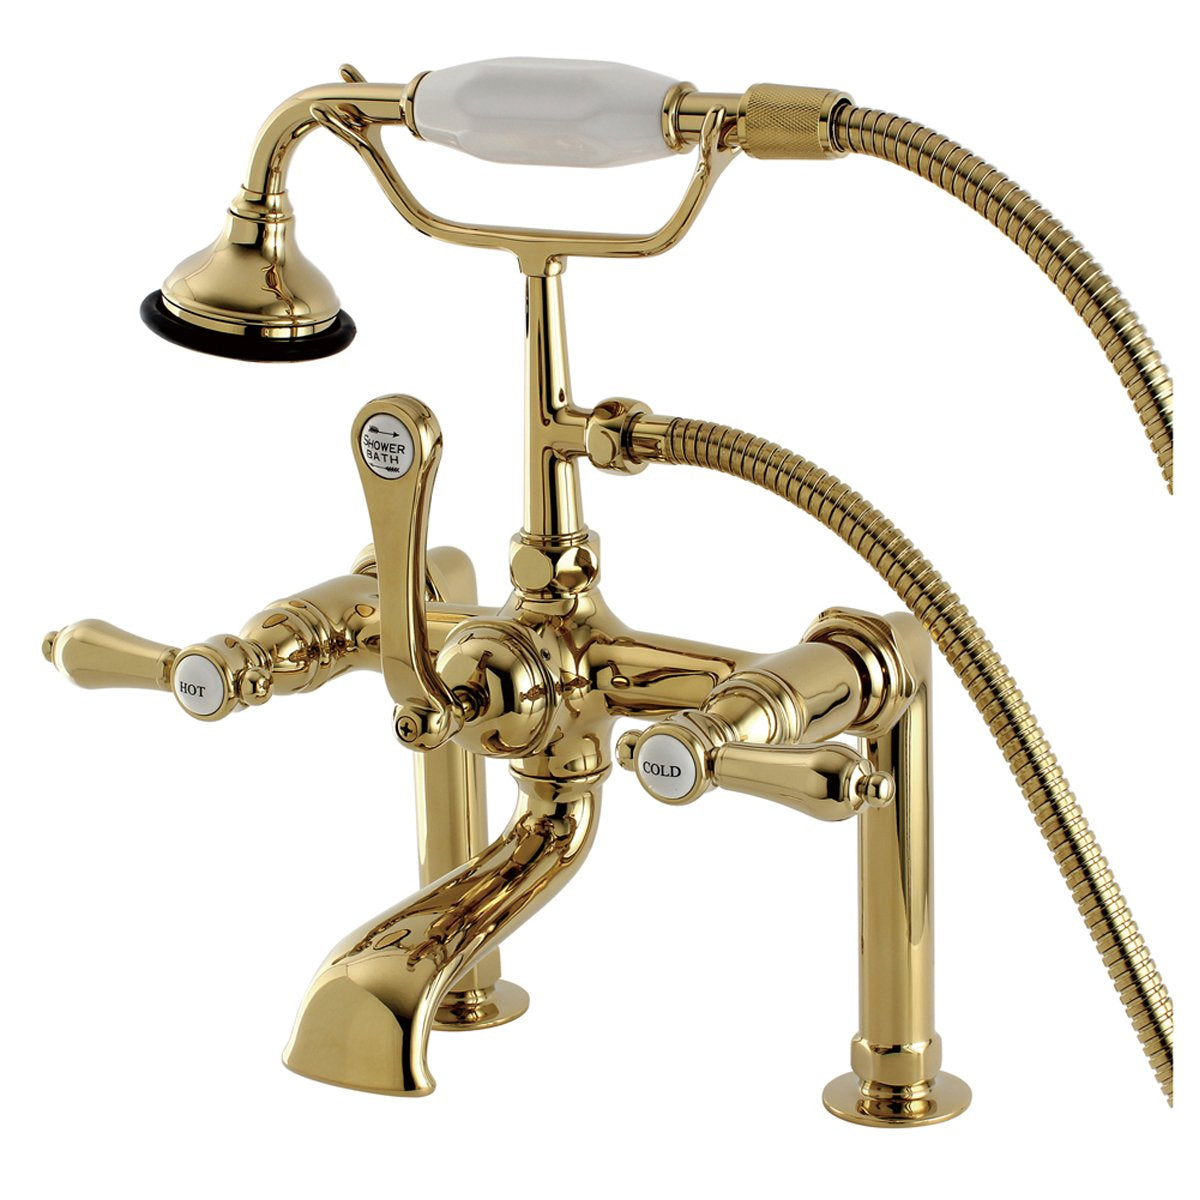 Kingston Brass Aqua Eden AE103T2BAL Bel Air Deck Mount Clawfoot Tub Faucet in Polished Brass-Tub Faucets-Free Shipping-Directsinks.